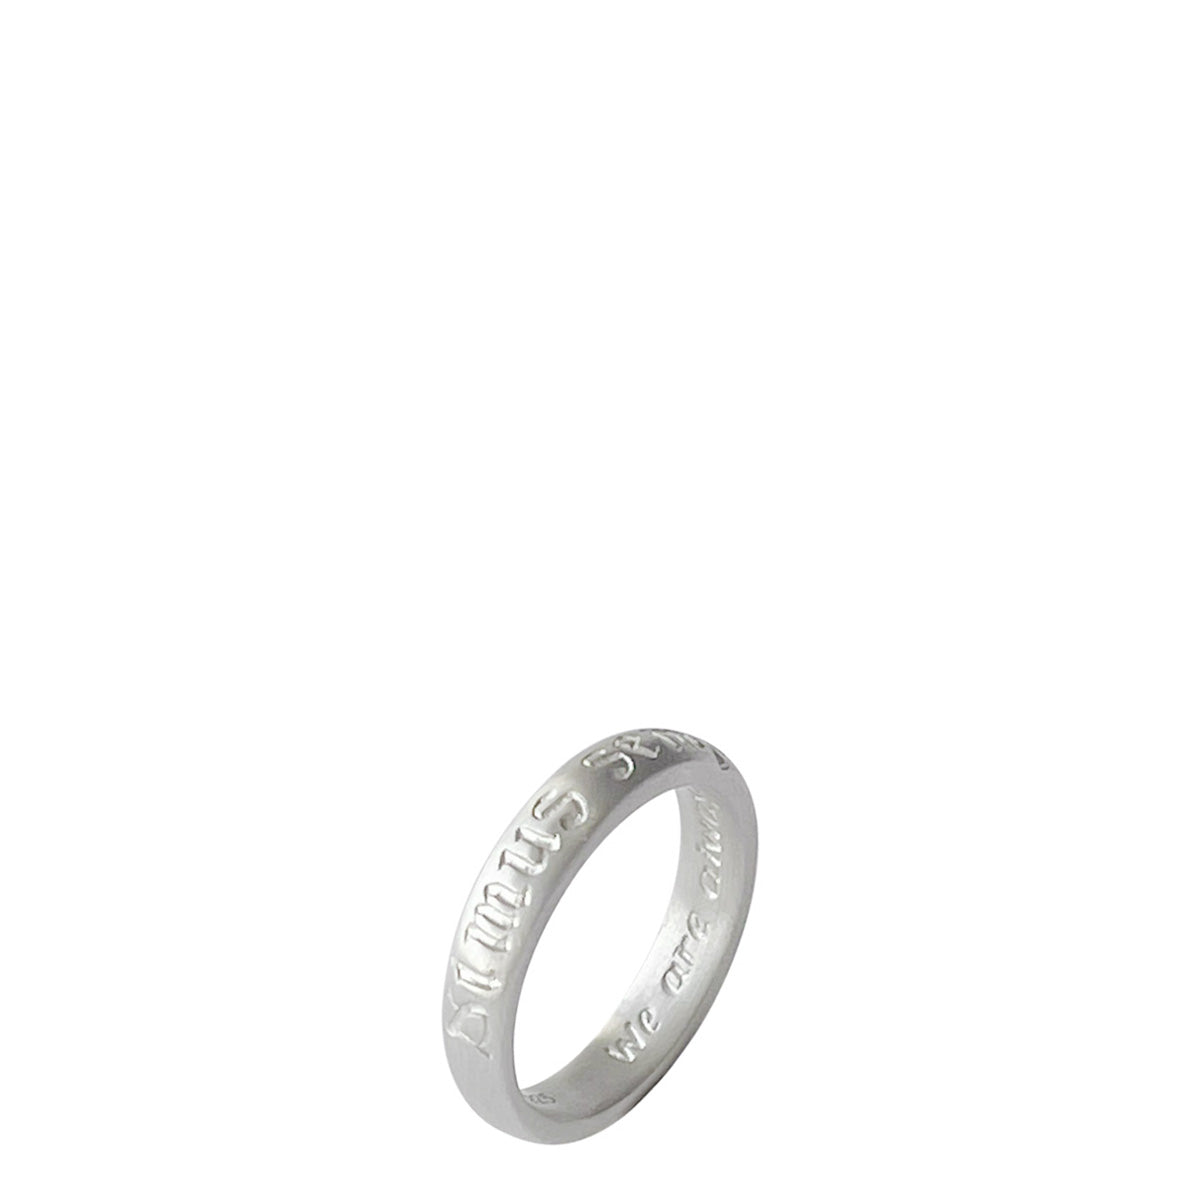 Sterling Silver Latin We Are Always In Process Ring